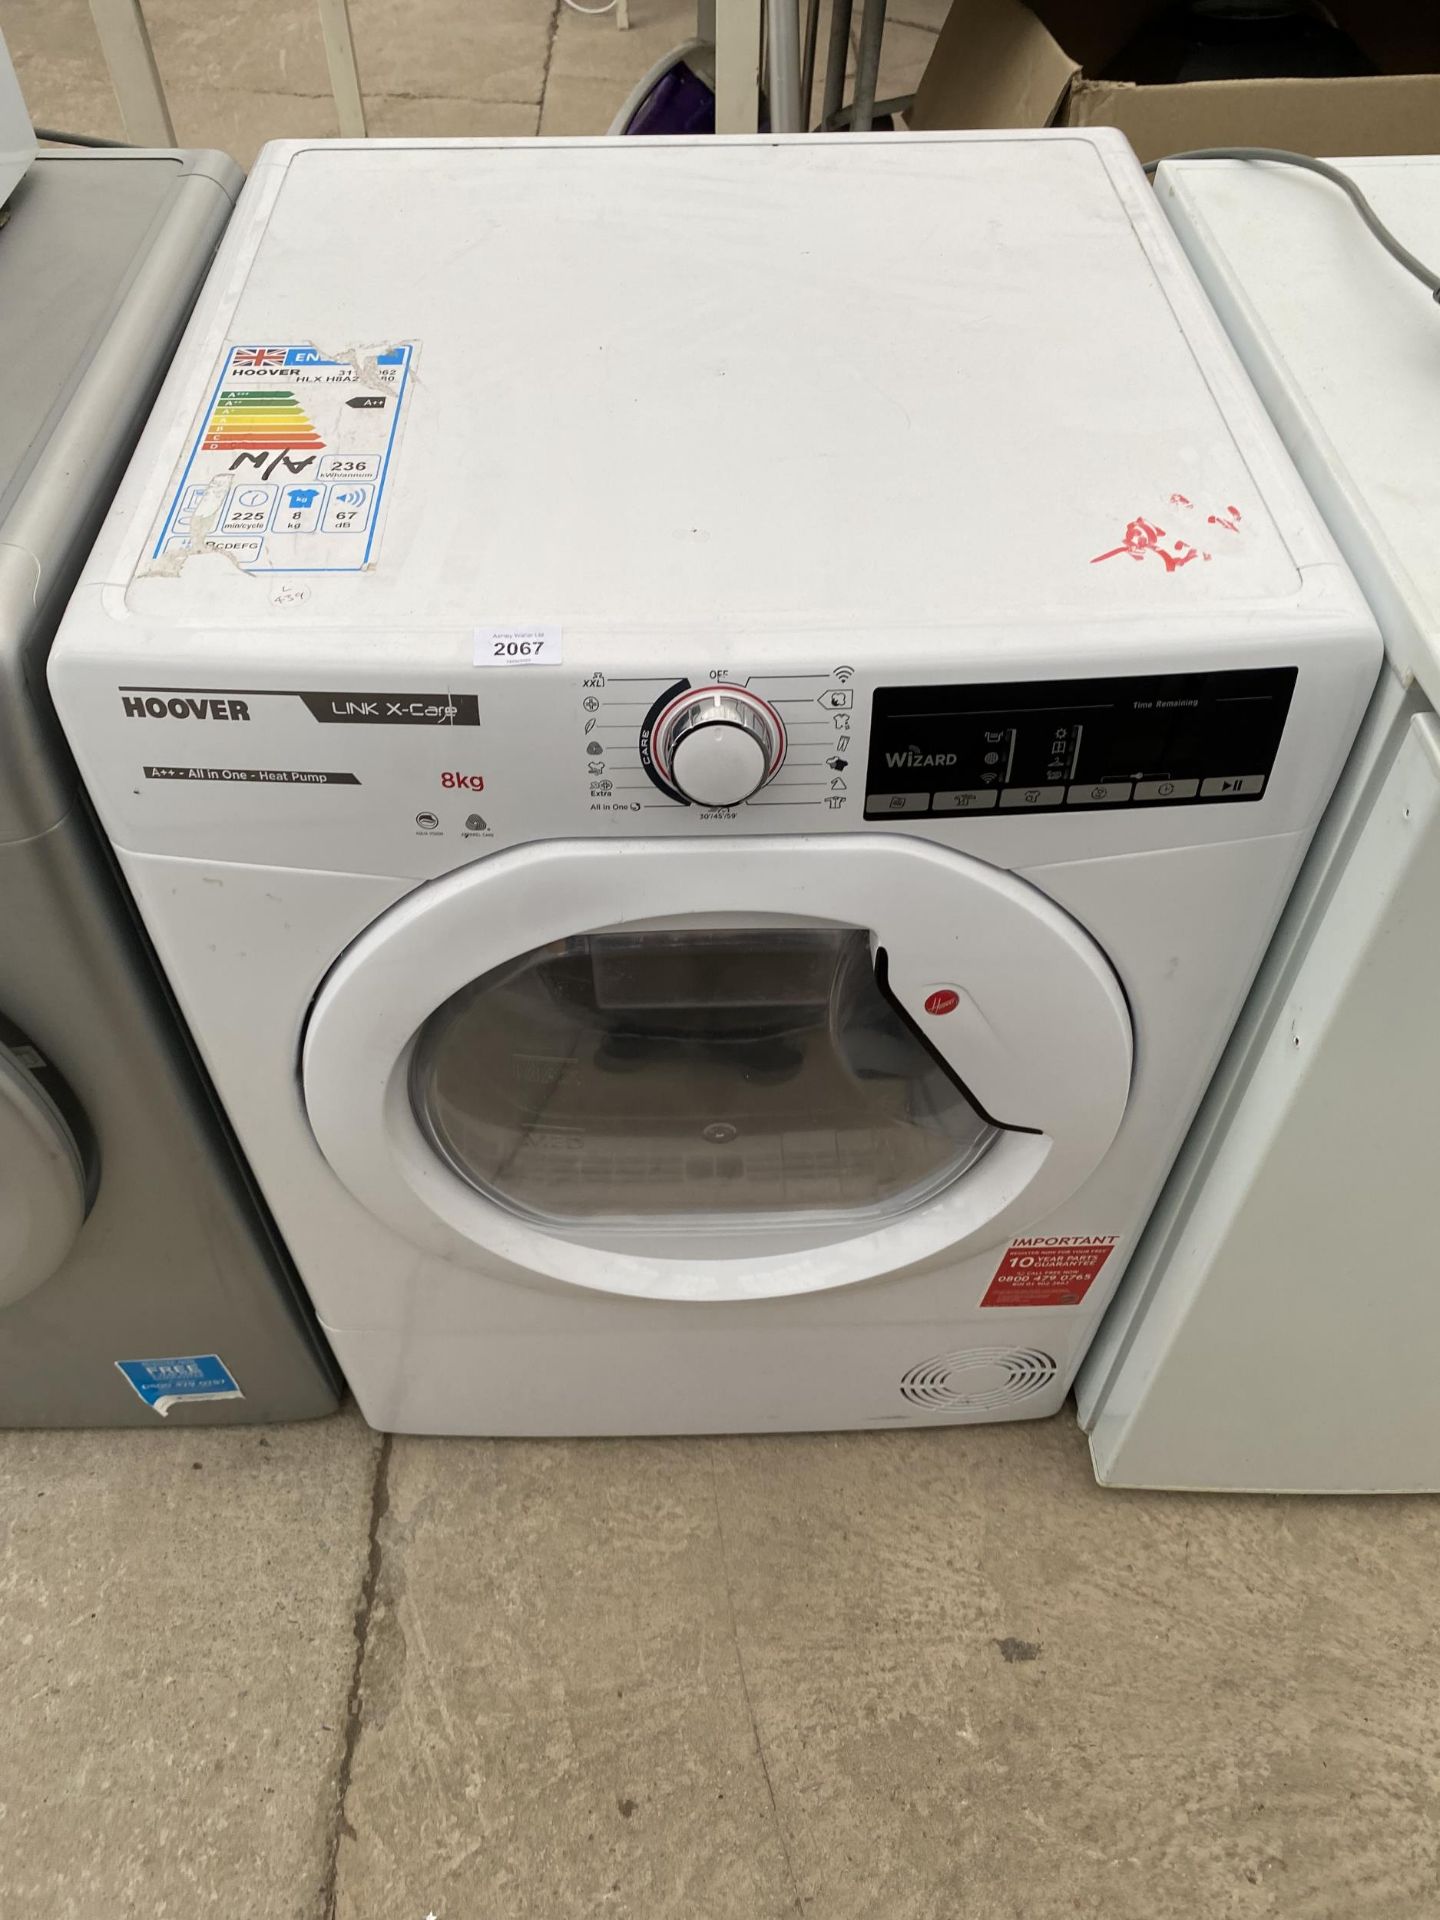 A WHITE HOOVER 8KG TUMBLE DRYER